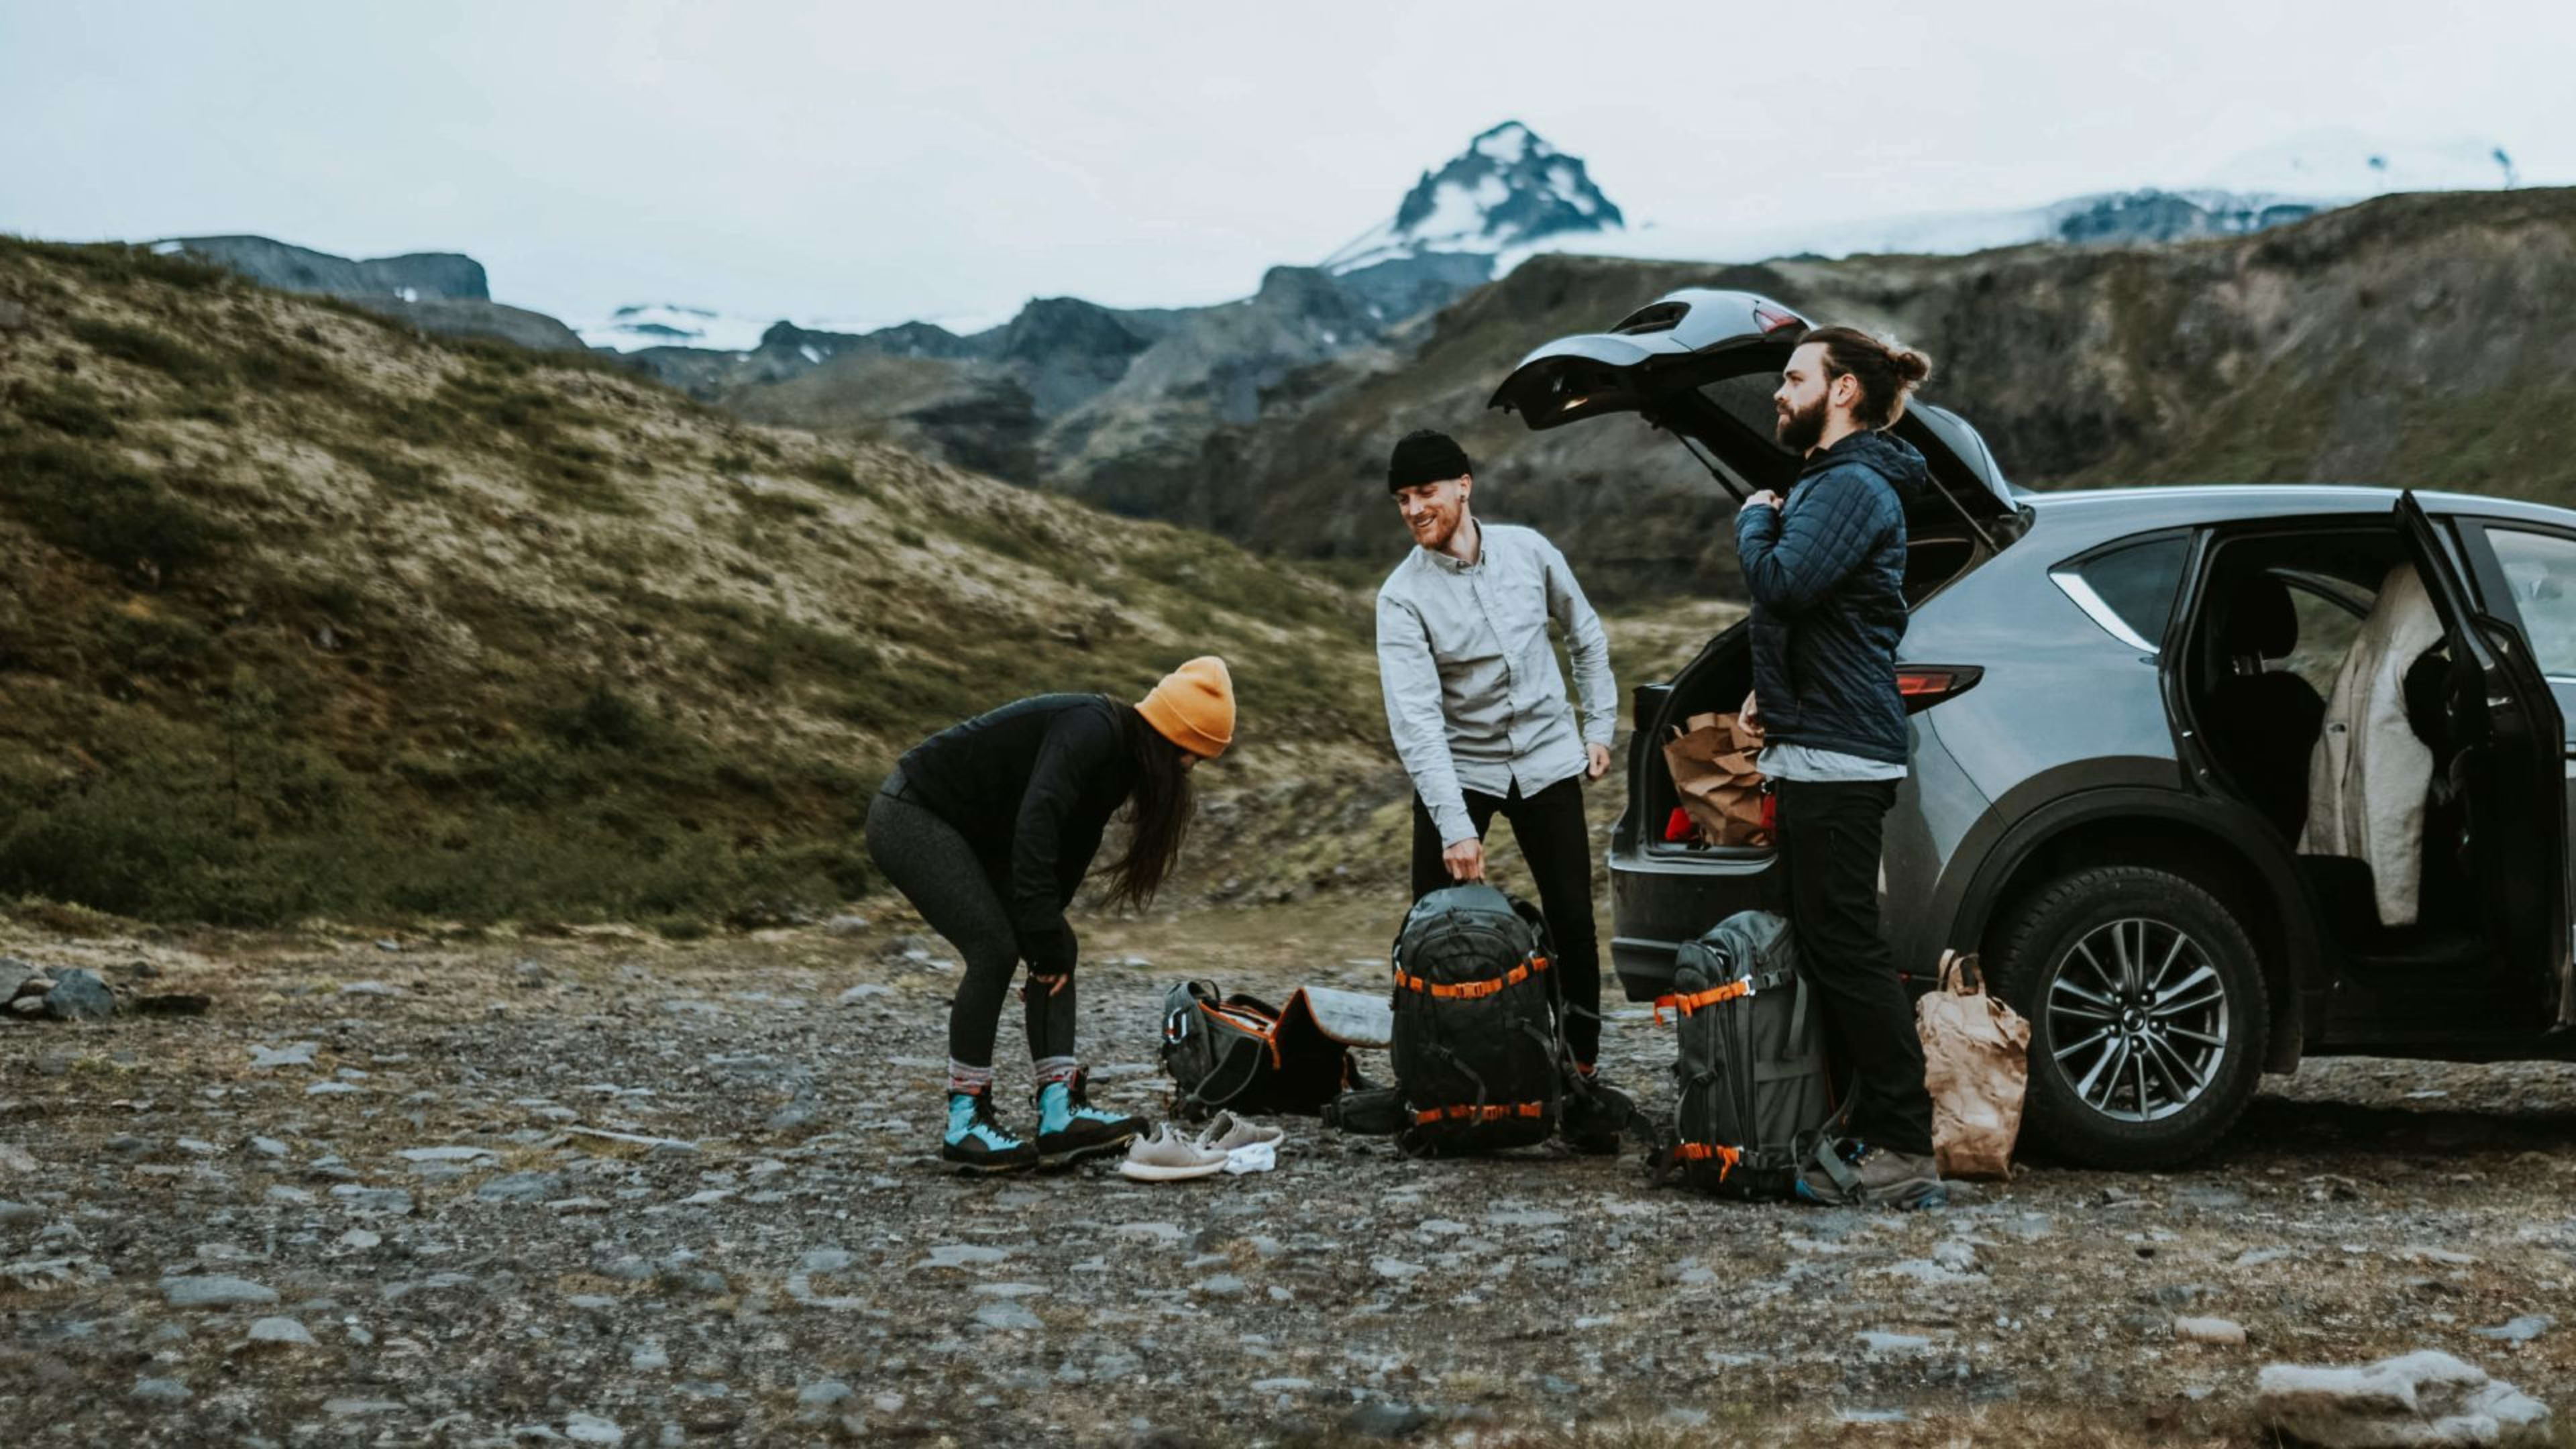 A group of hikers getting ready